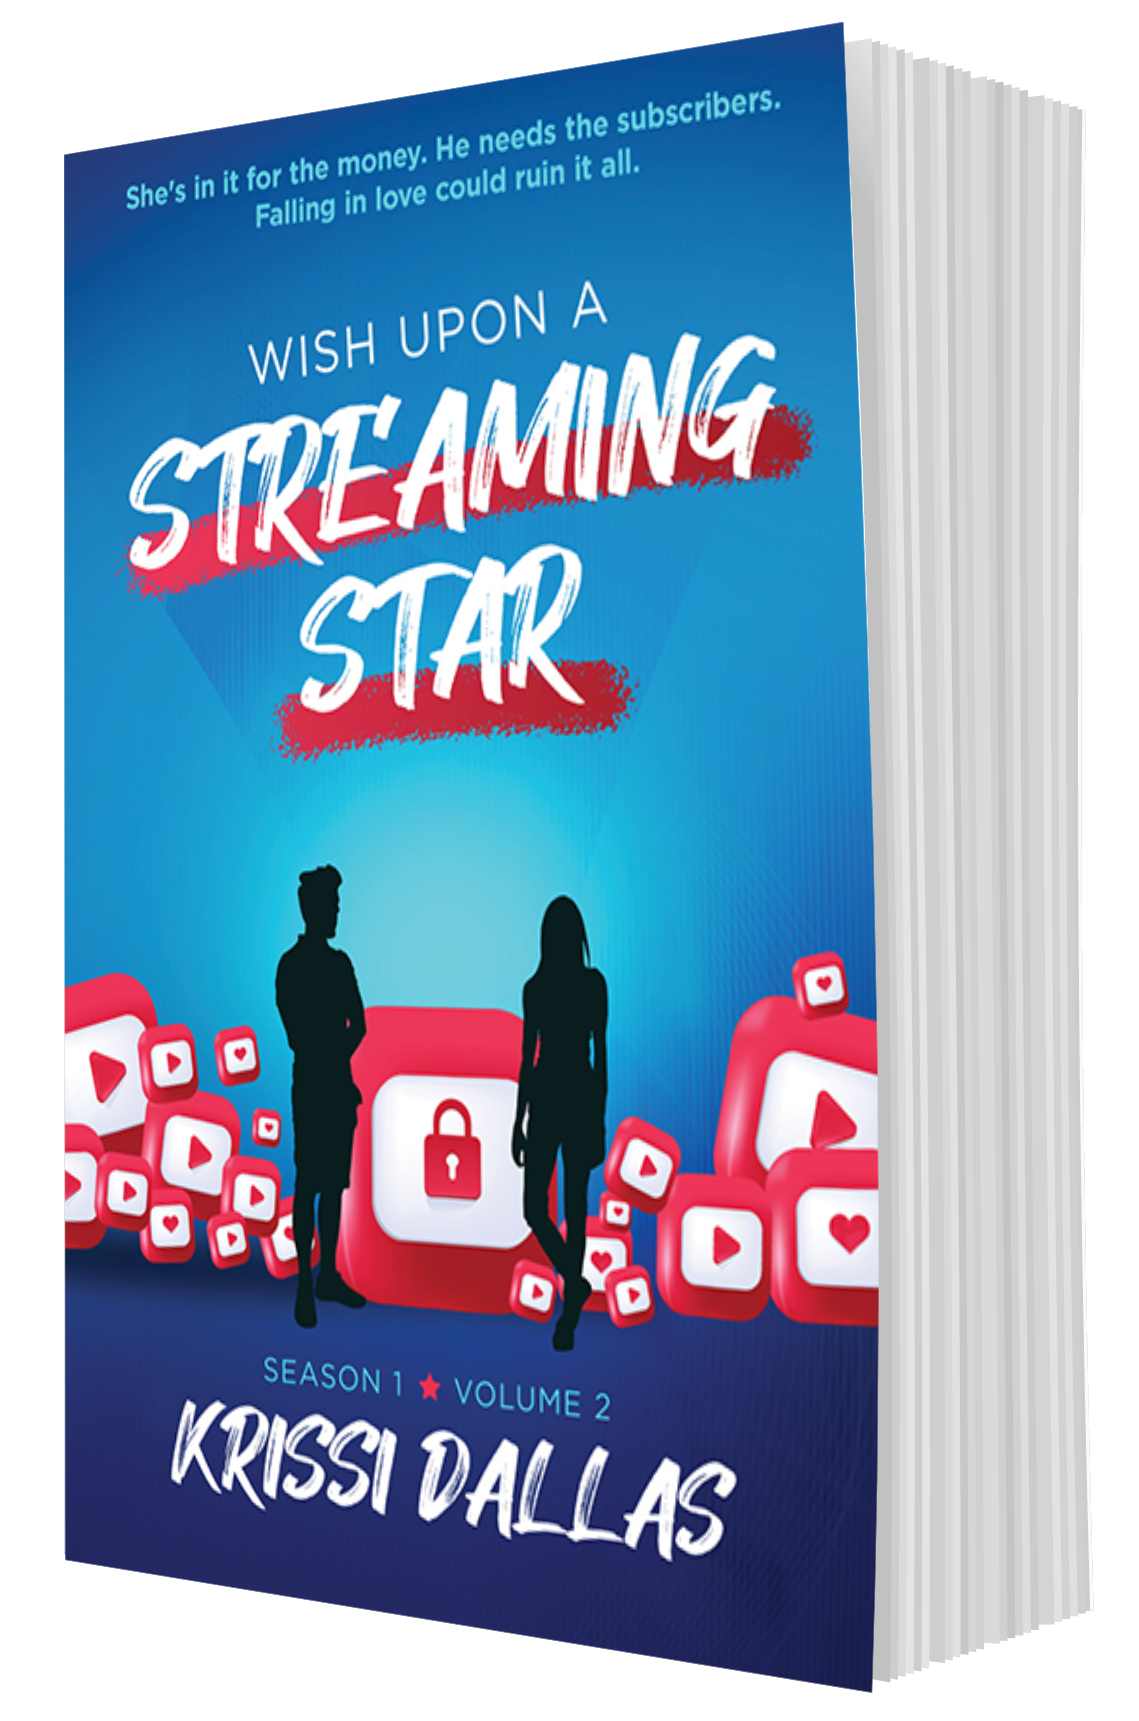 Wish Upon A Streaming Star Season 1 Volume 2 - Special Edition Paperback